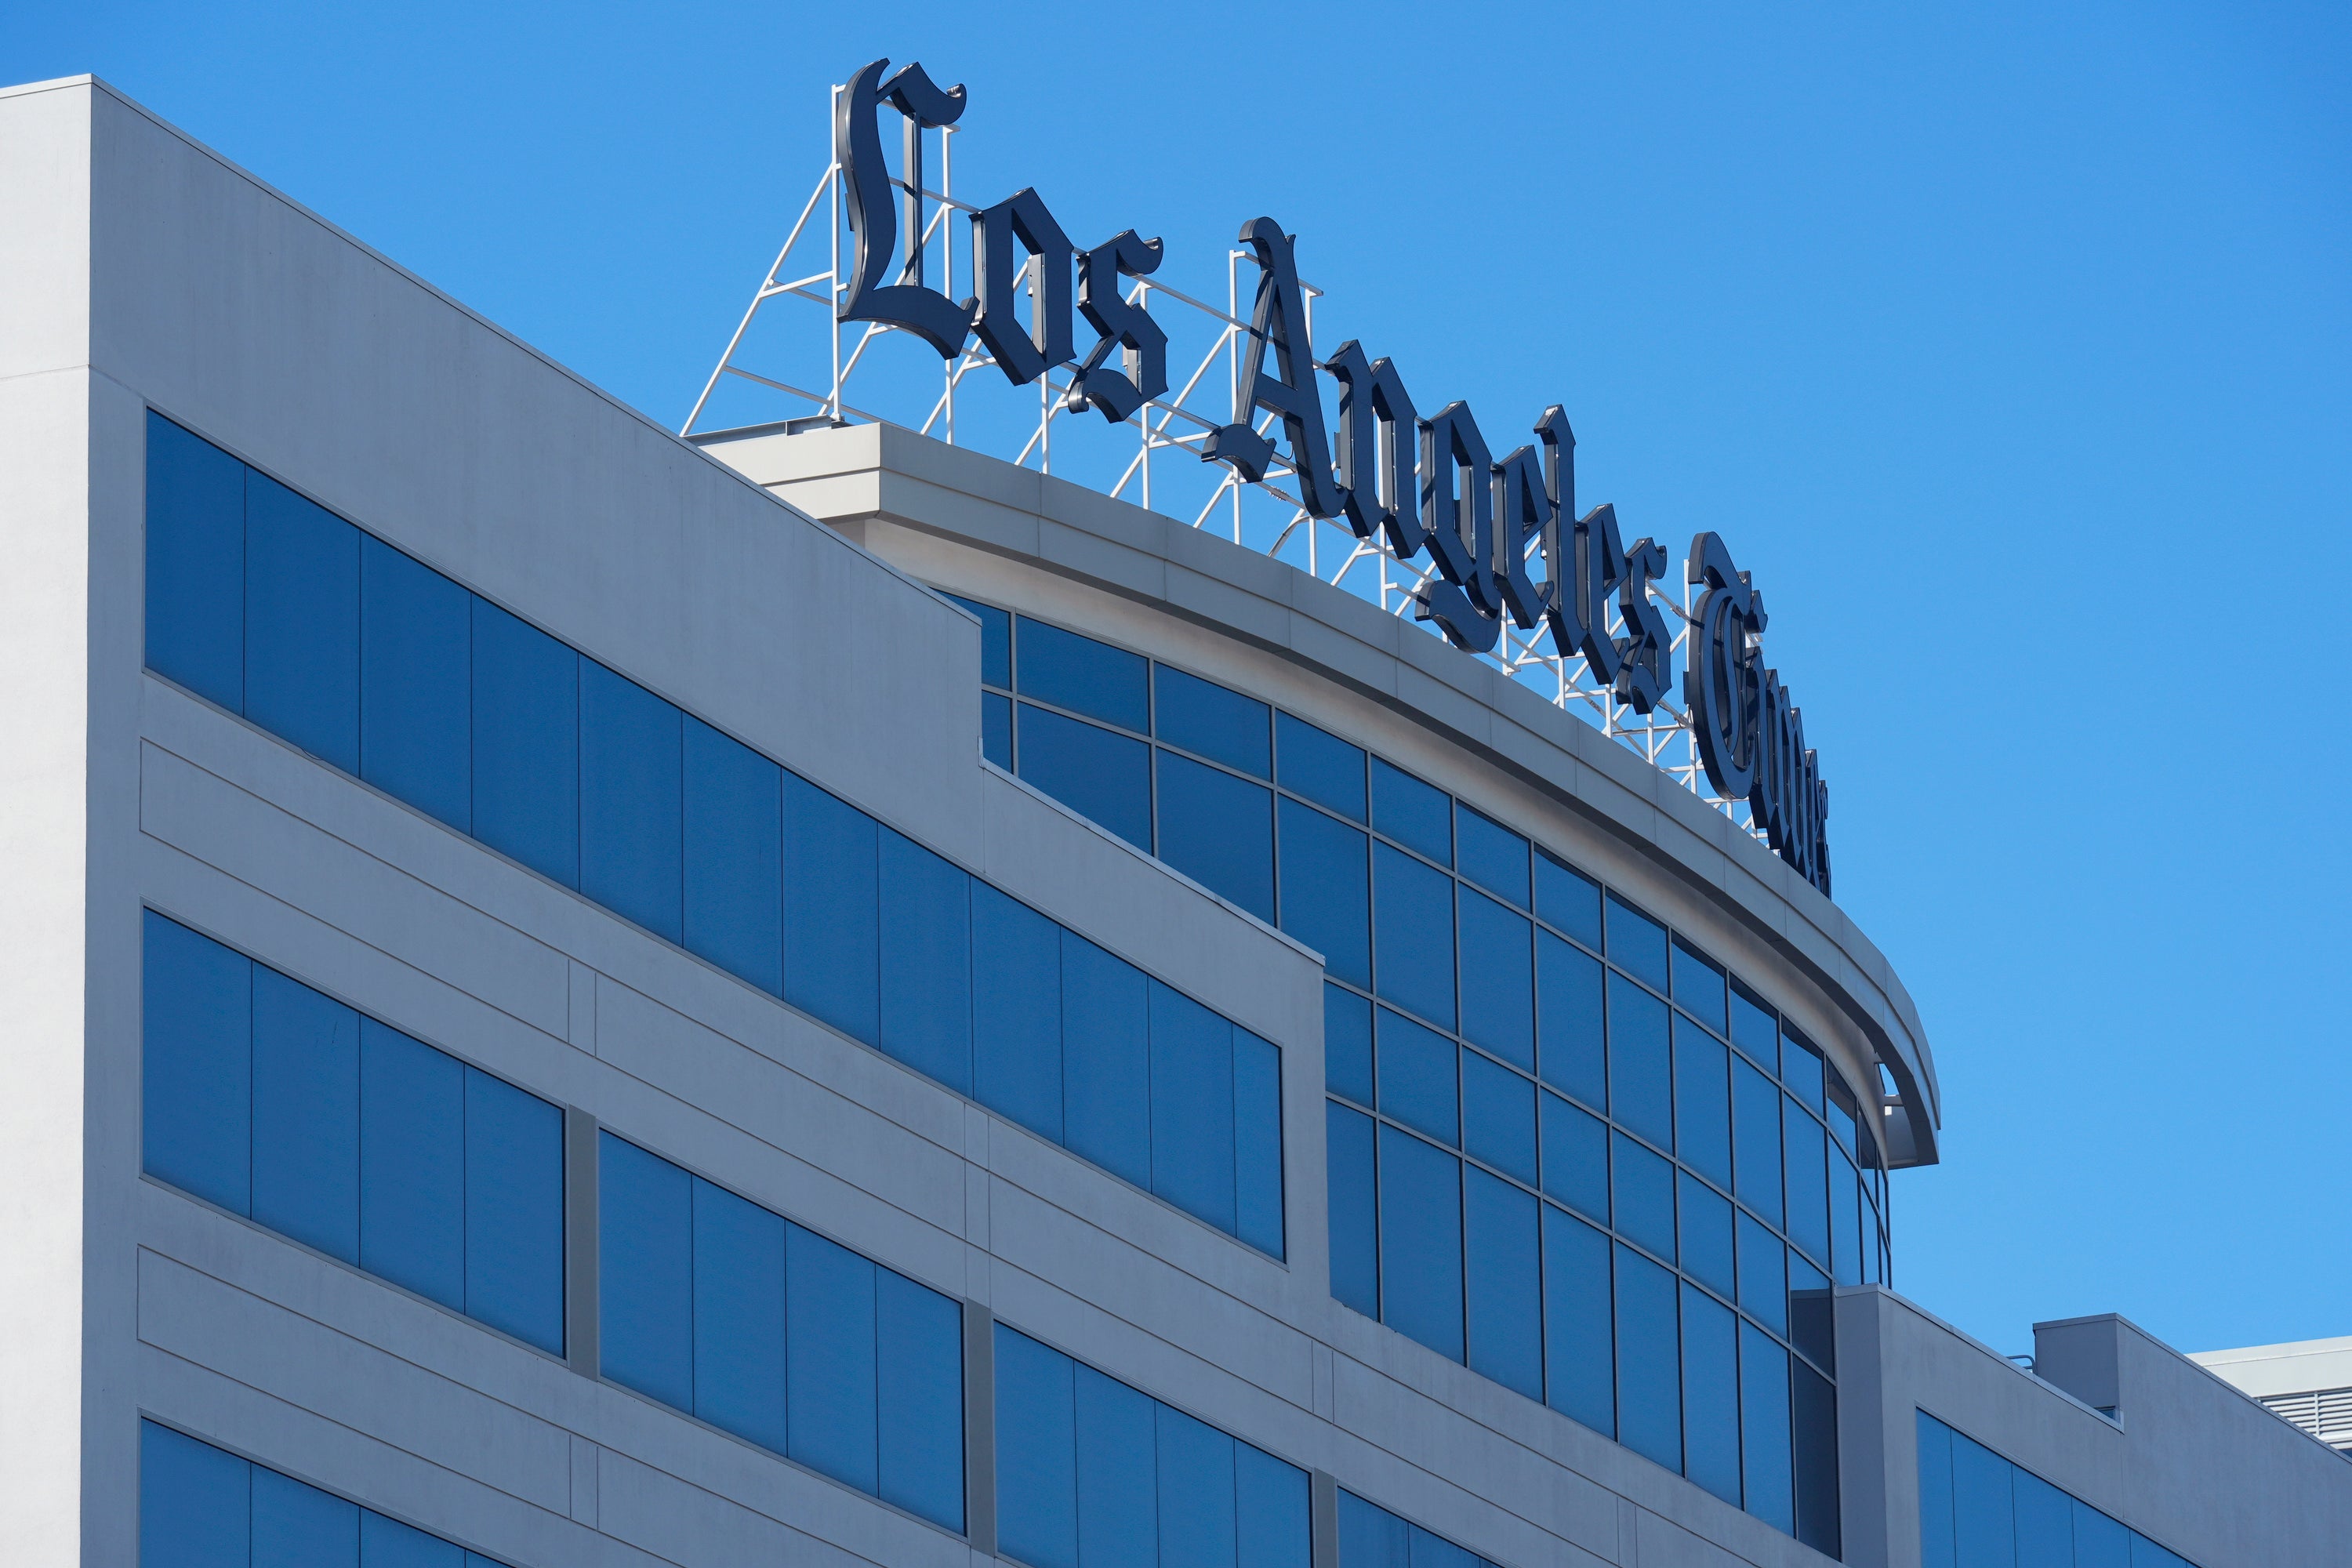 More than 100 employees at the LA Times have been laid off